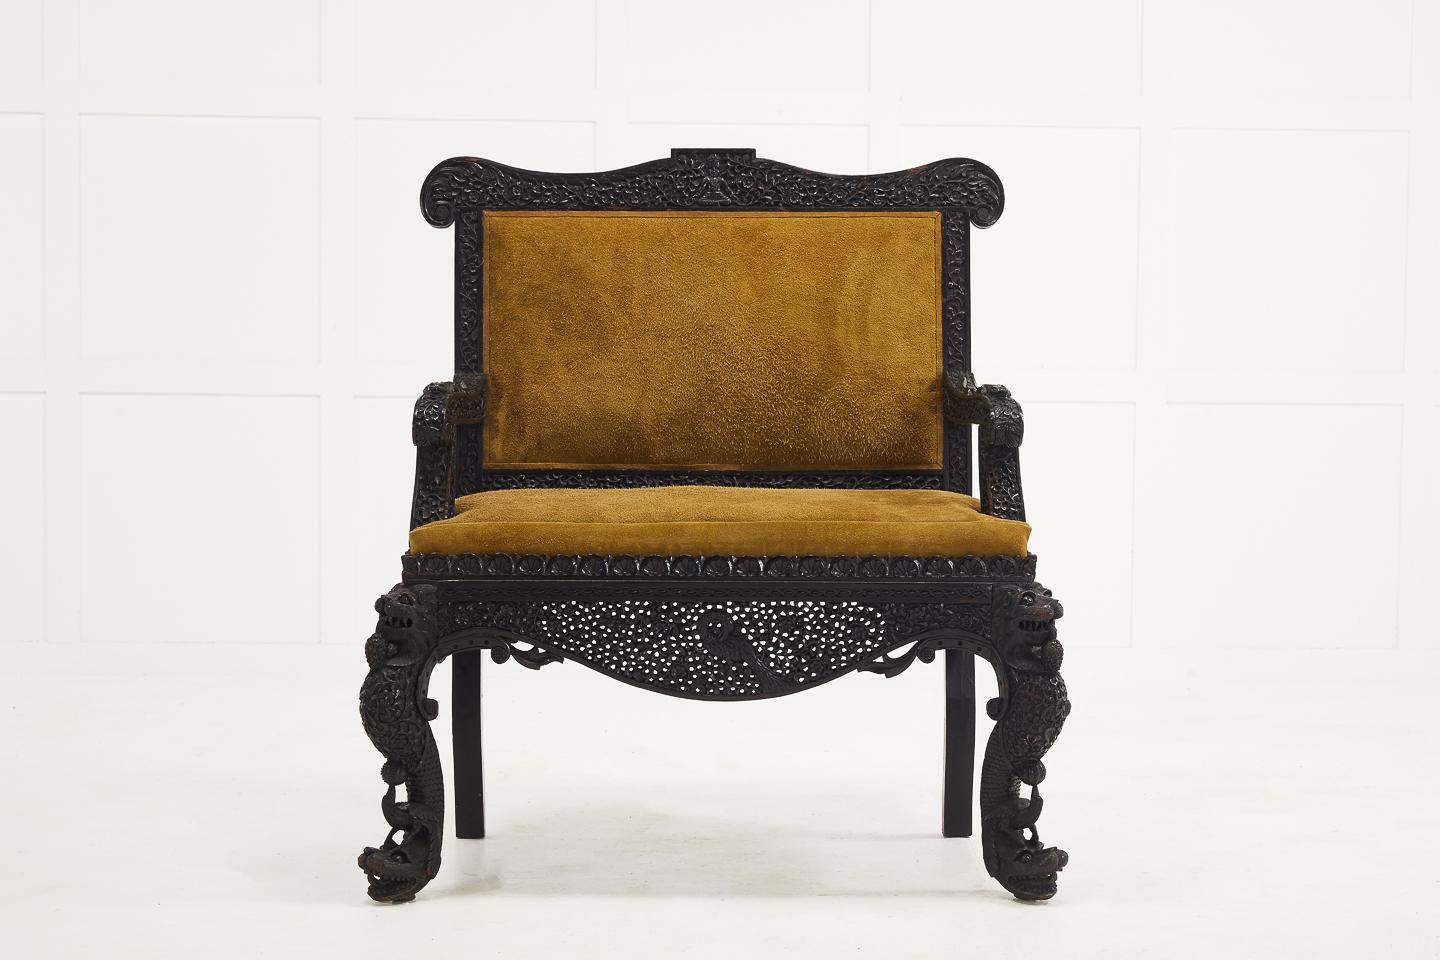 Unusual, late 19th century carved hardwood Anglo-Indian sofa upholstered in suede, circa 1900.

Two available.